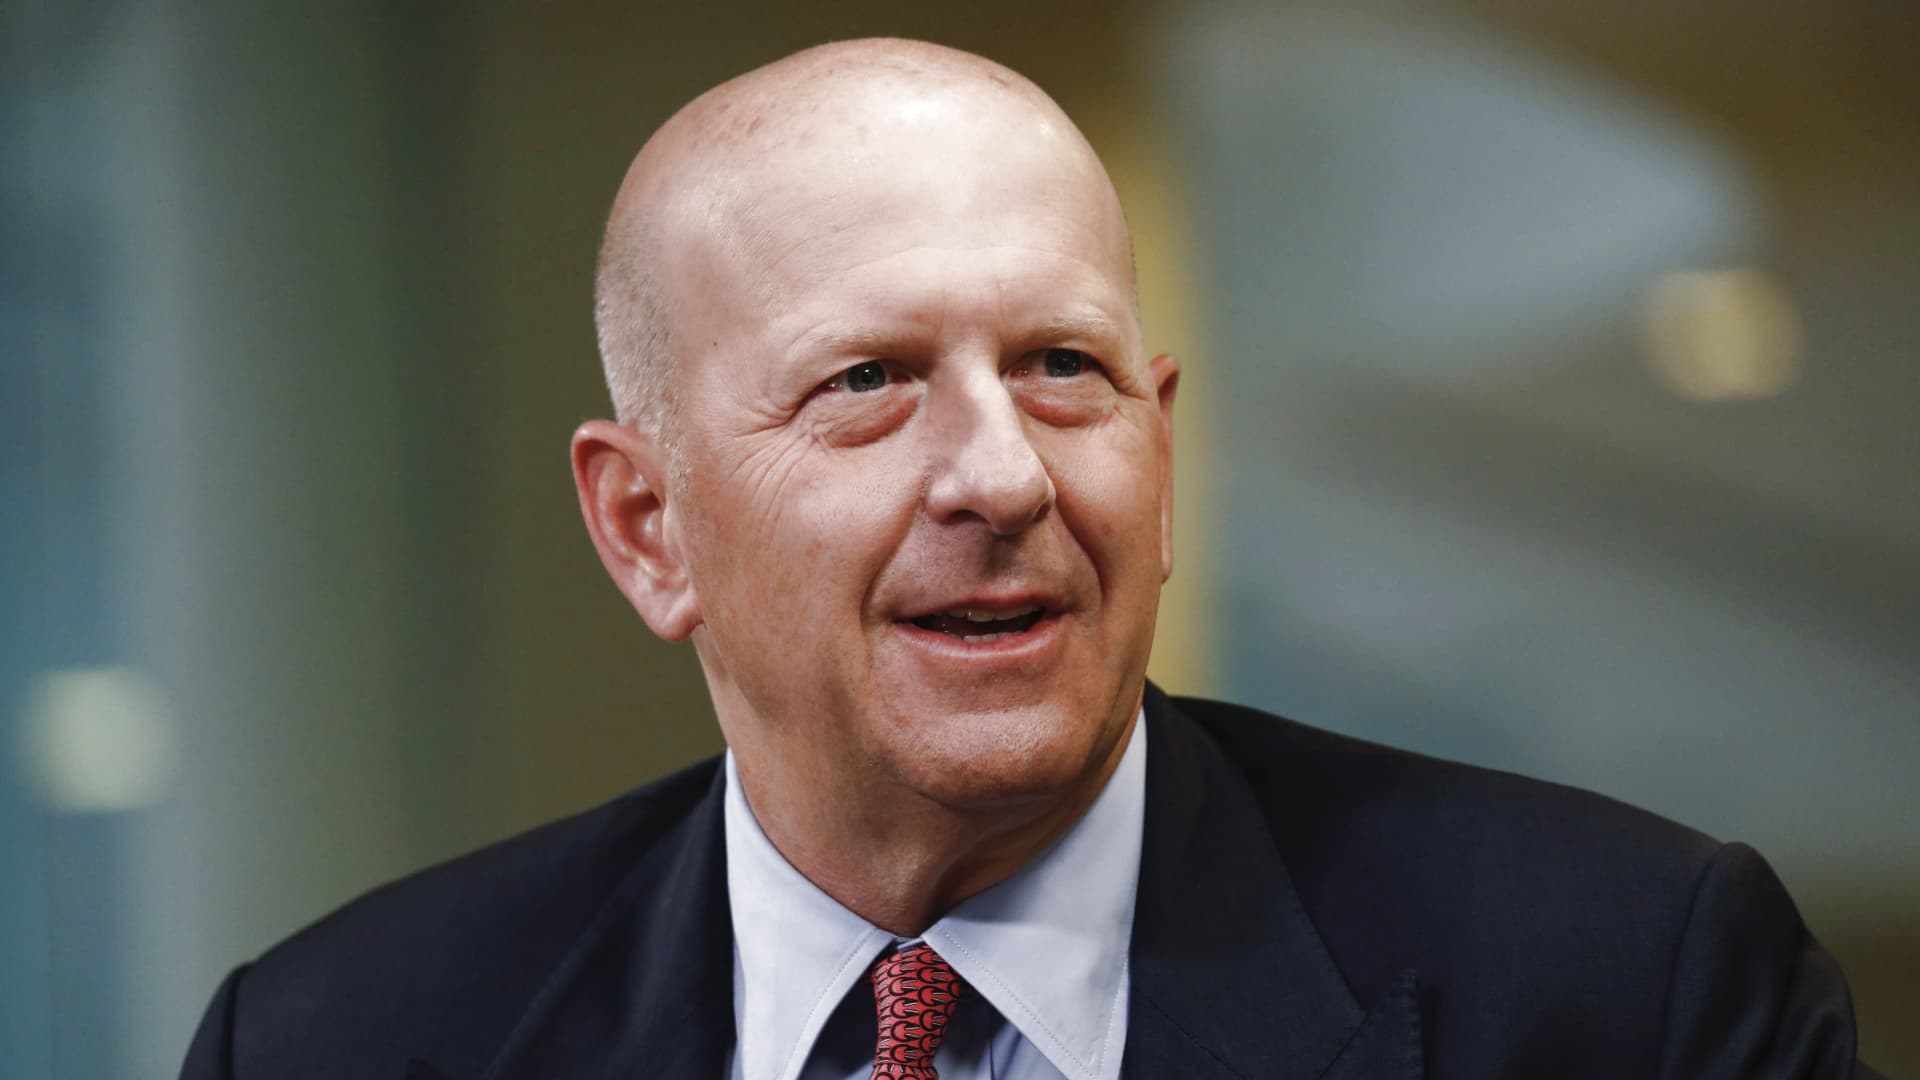 David Solomon, chief executive officer of Goldman Sachs & Co., speaks during a Bloomberg Television interview at the Milken Institute Global Conference in Beverly Hills, California, U.S., on Monday, April 29, 2019.